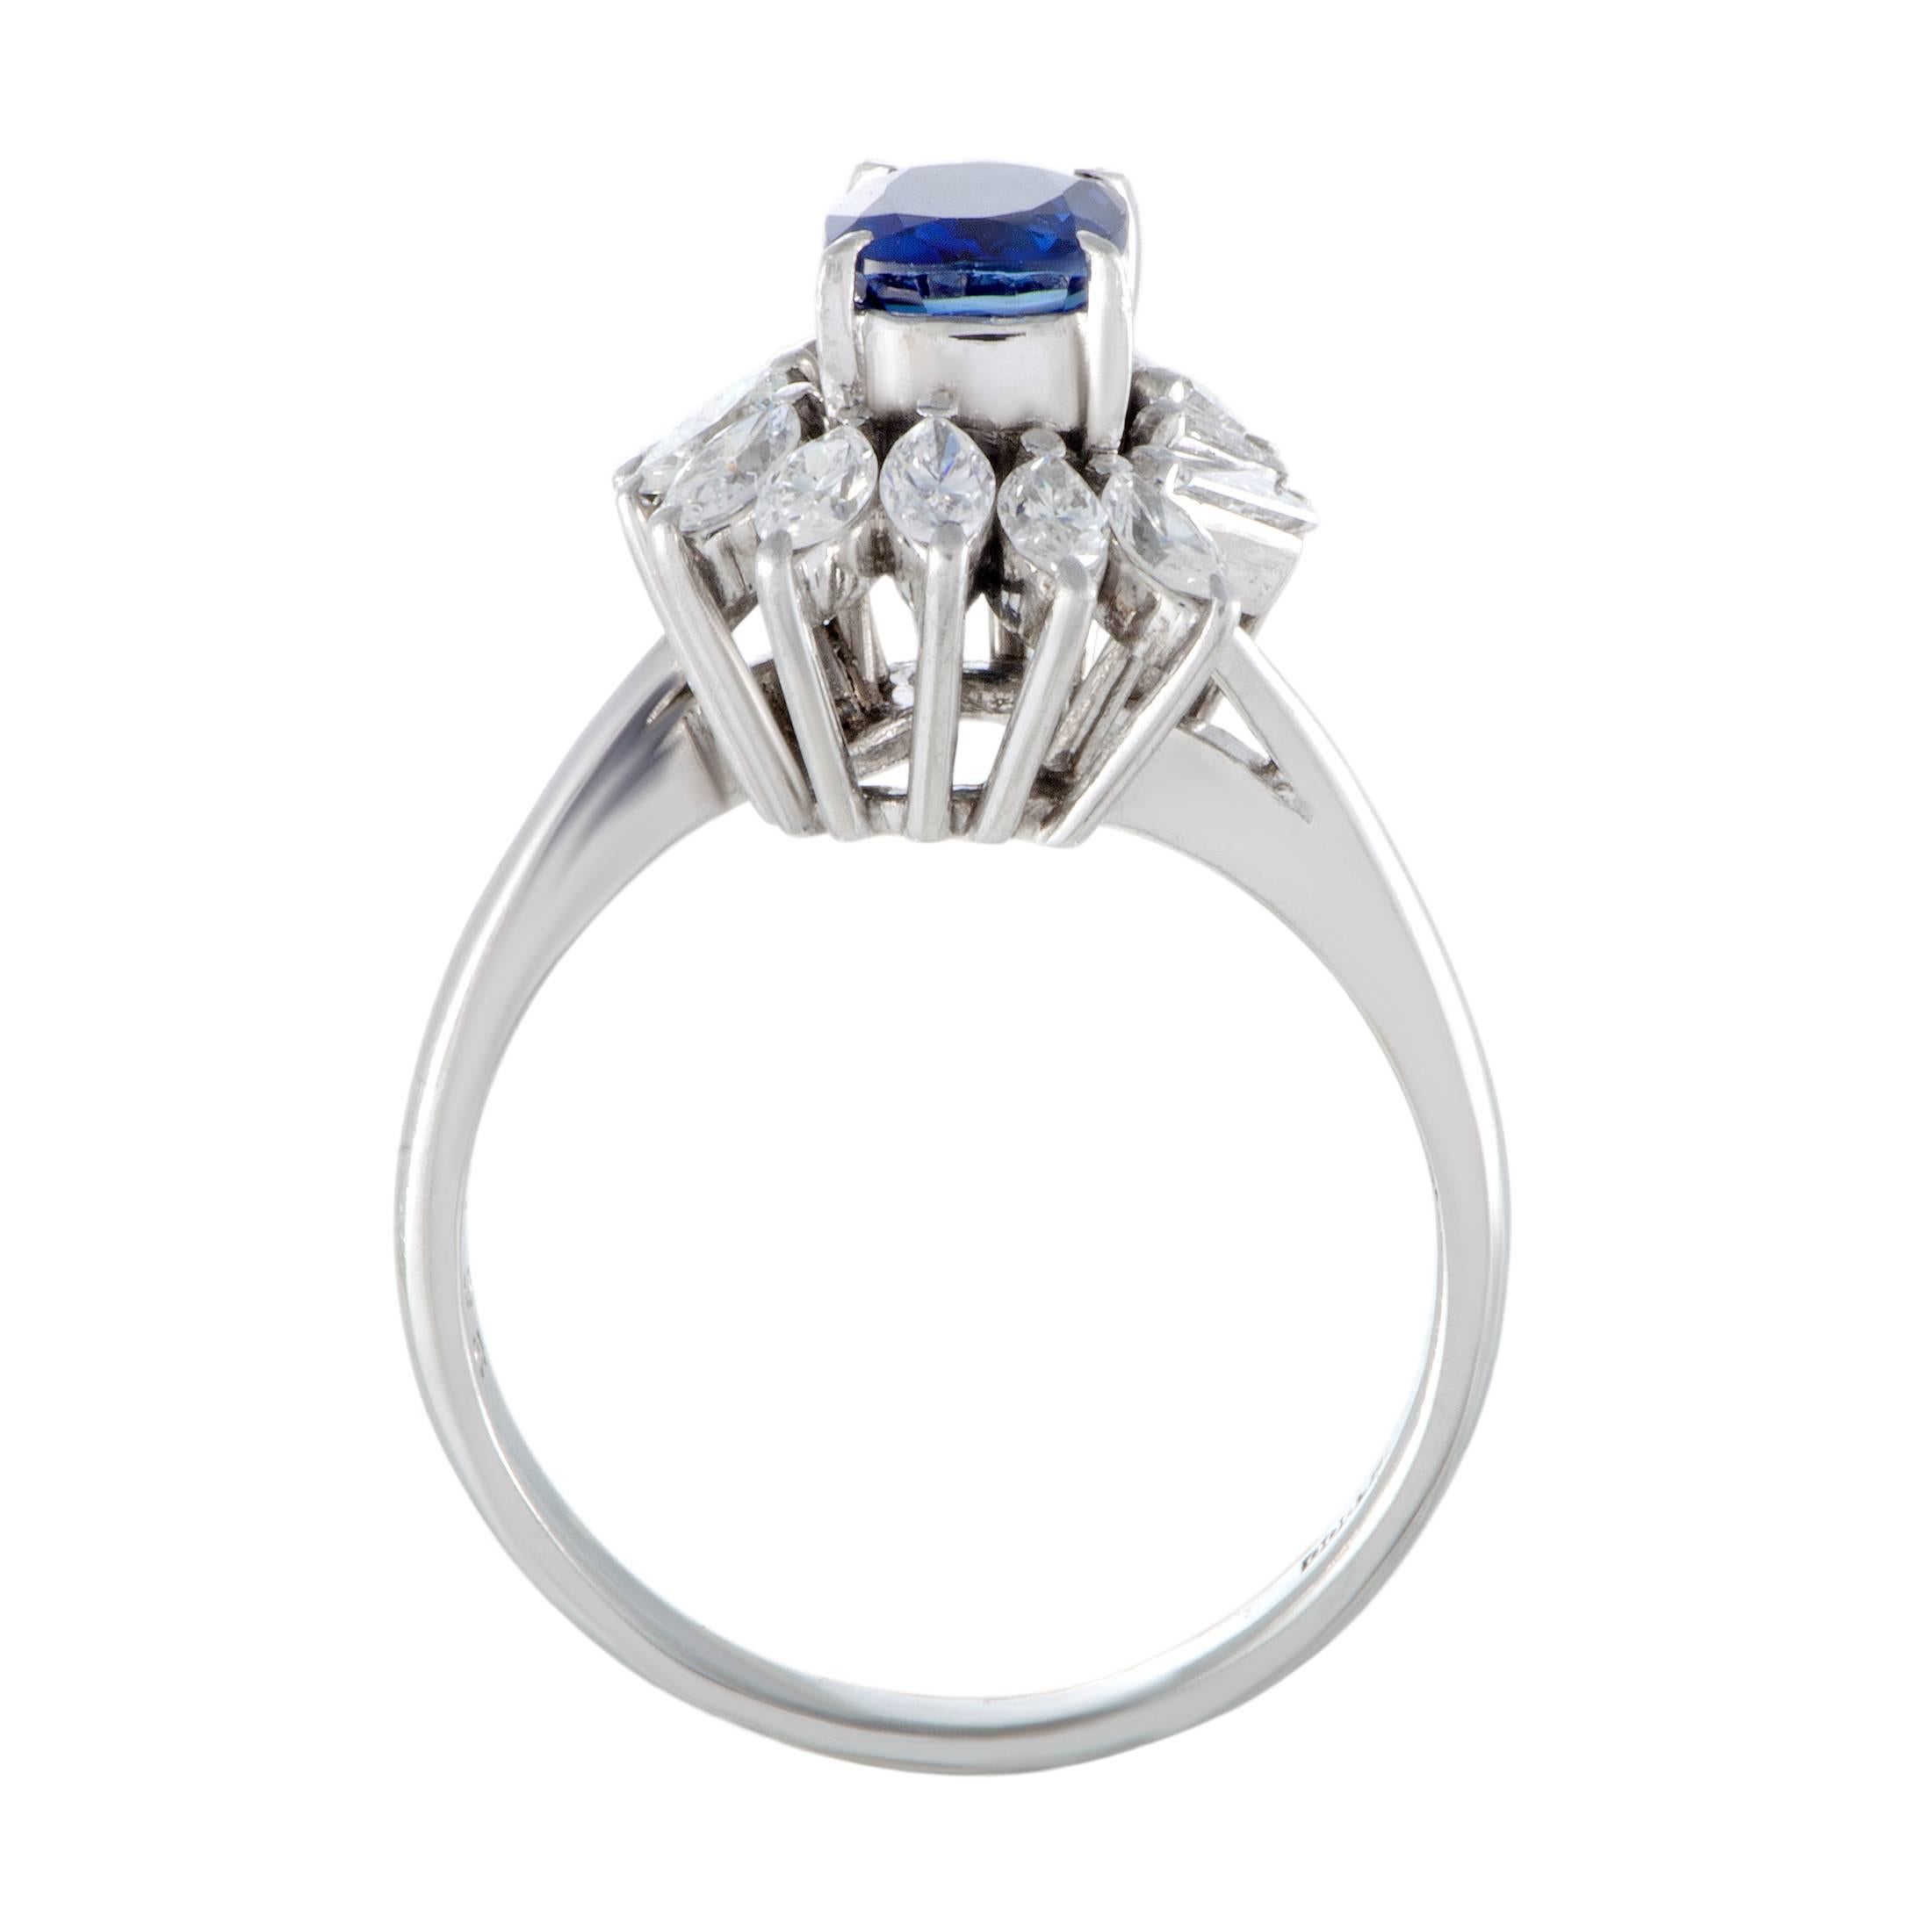 Beautifully made of elegant platinum and splendidly decorated with a luxurious blend of sapphire and diamond stones, this gorgeous ring offers an incredibly refined appearance. The sapphire weighs 0.98 carats while the diversely cut diamonds amount